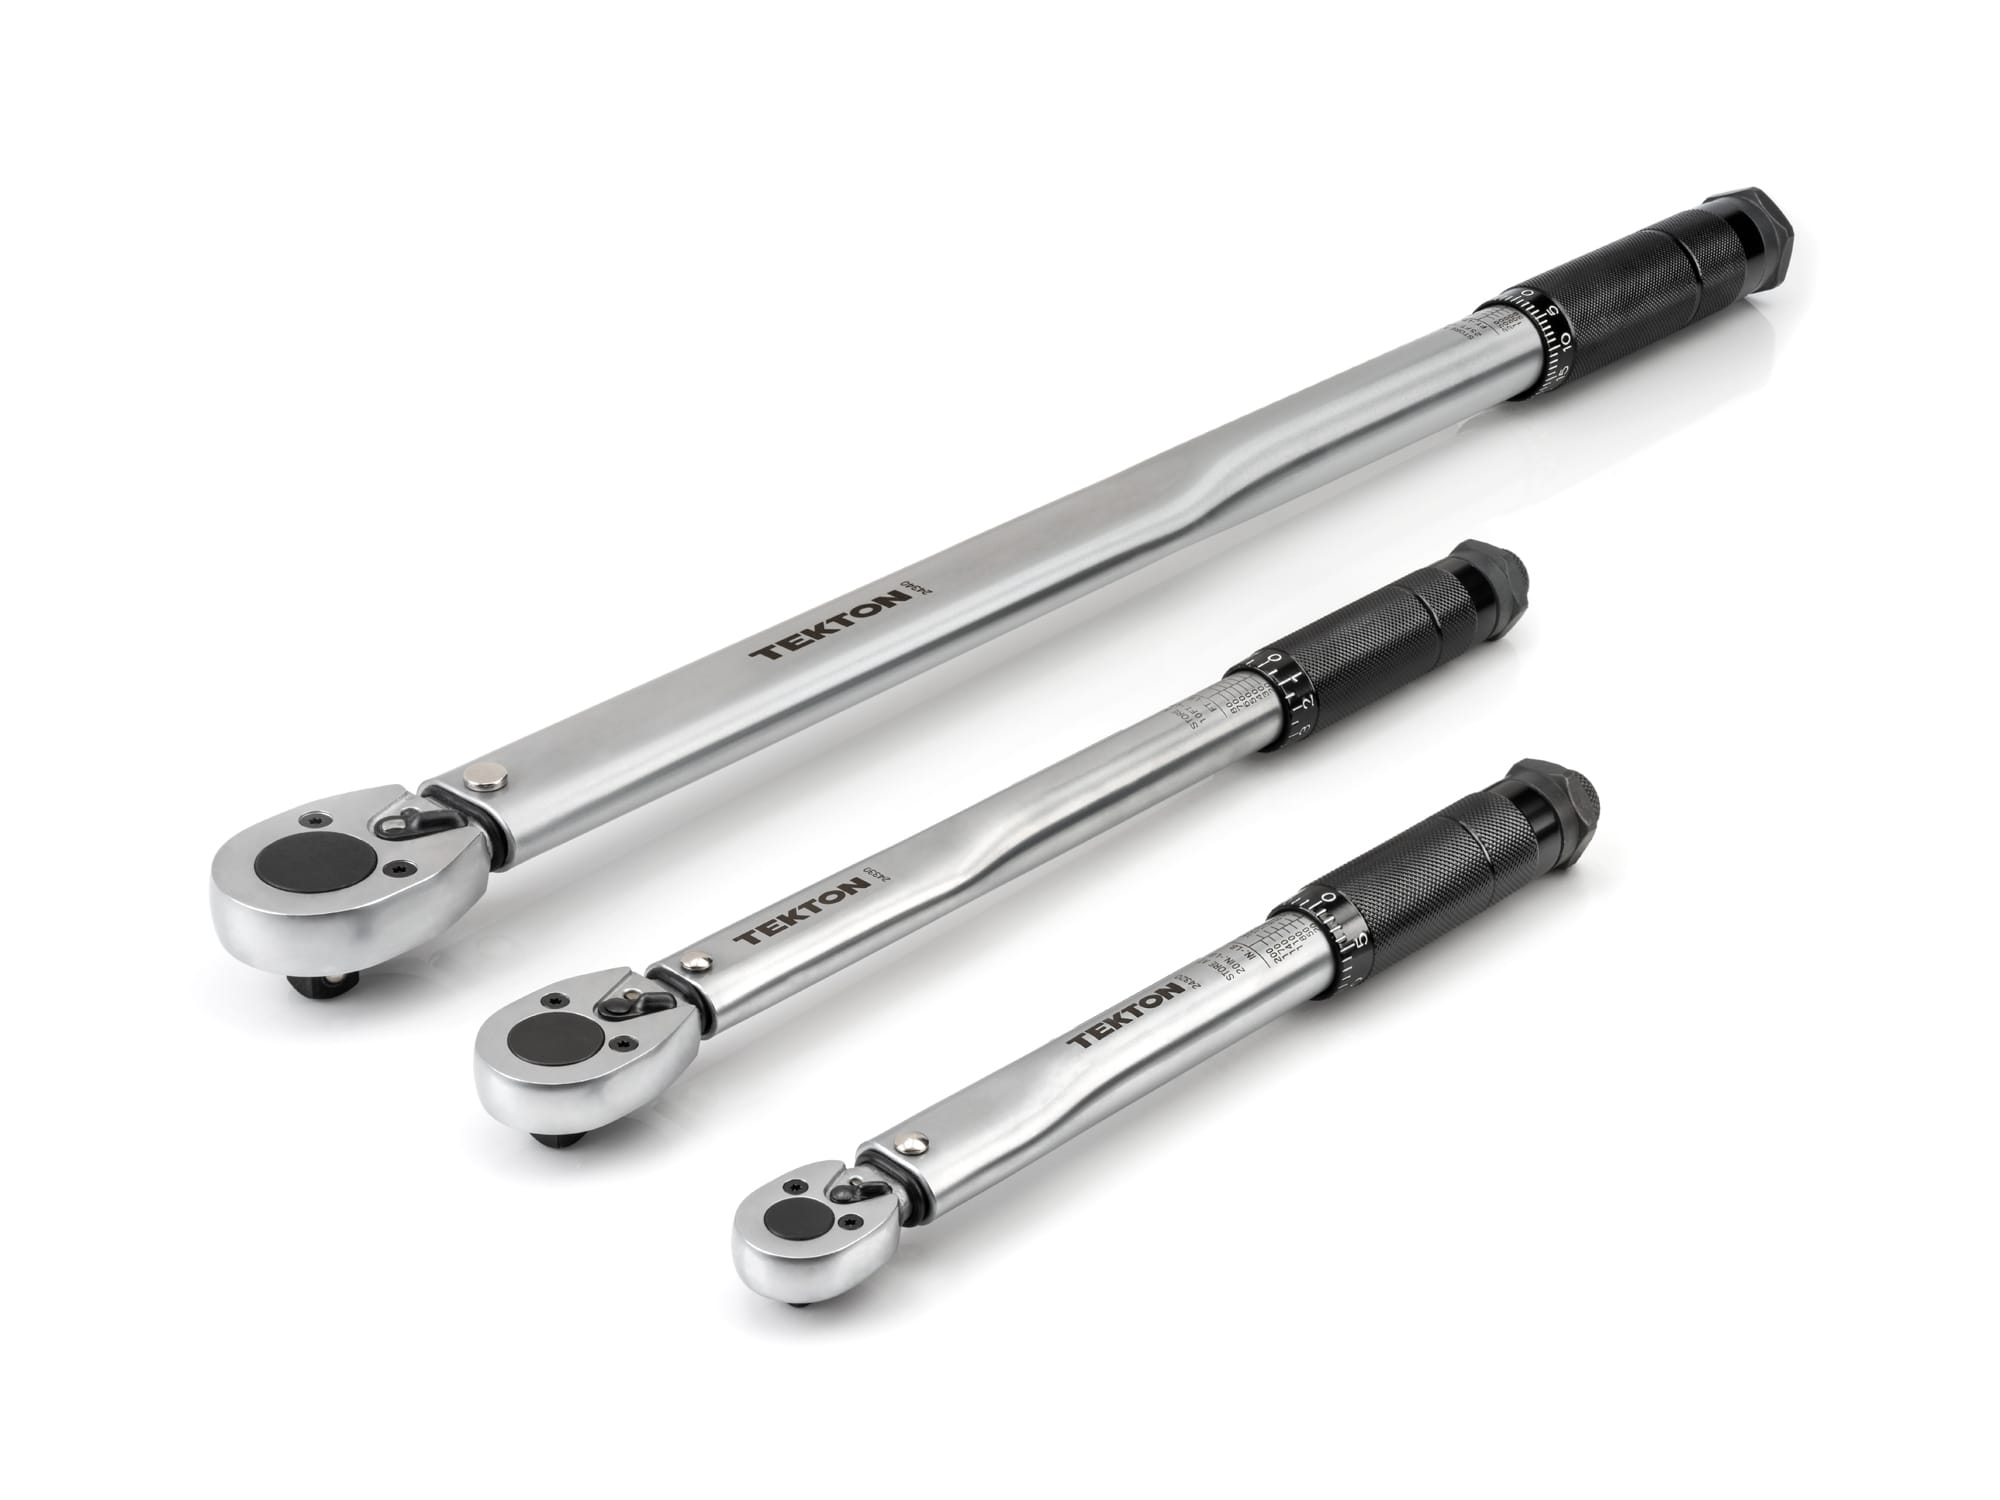 Three Micrometer Torque Wrenches